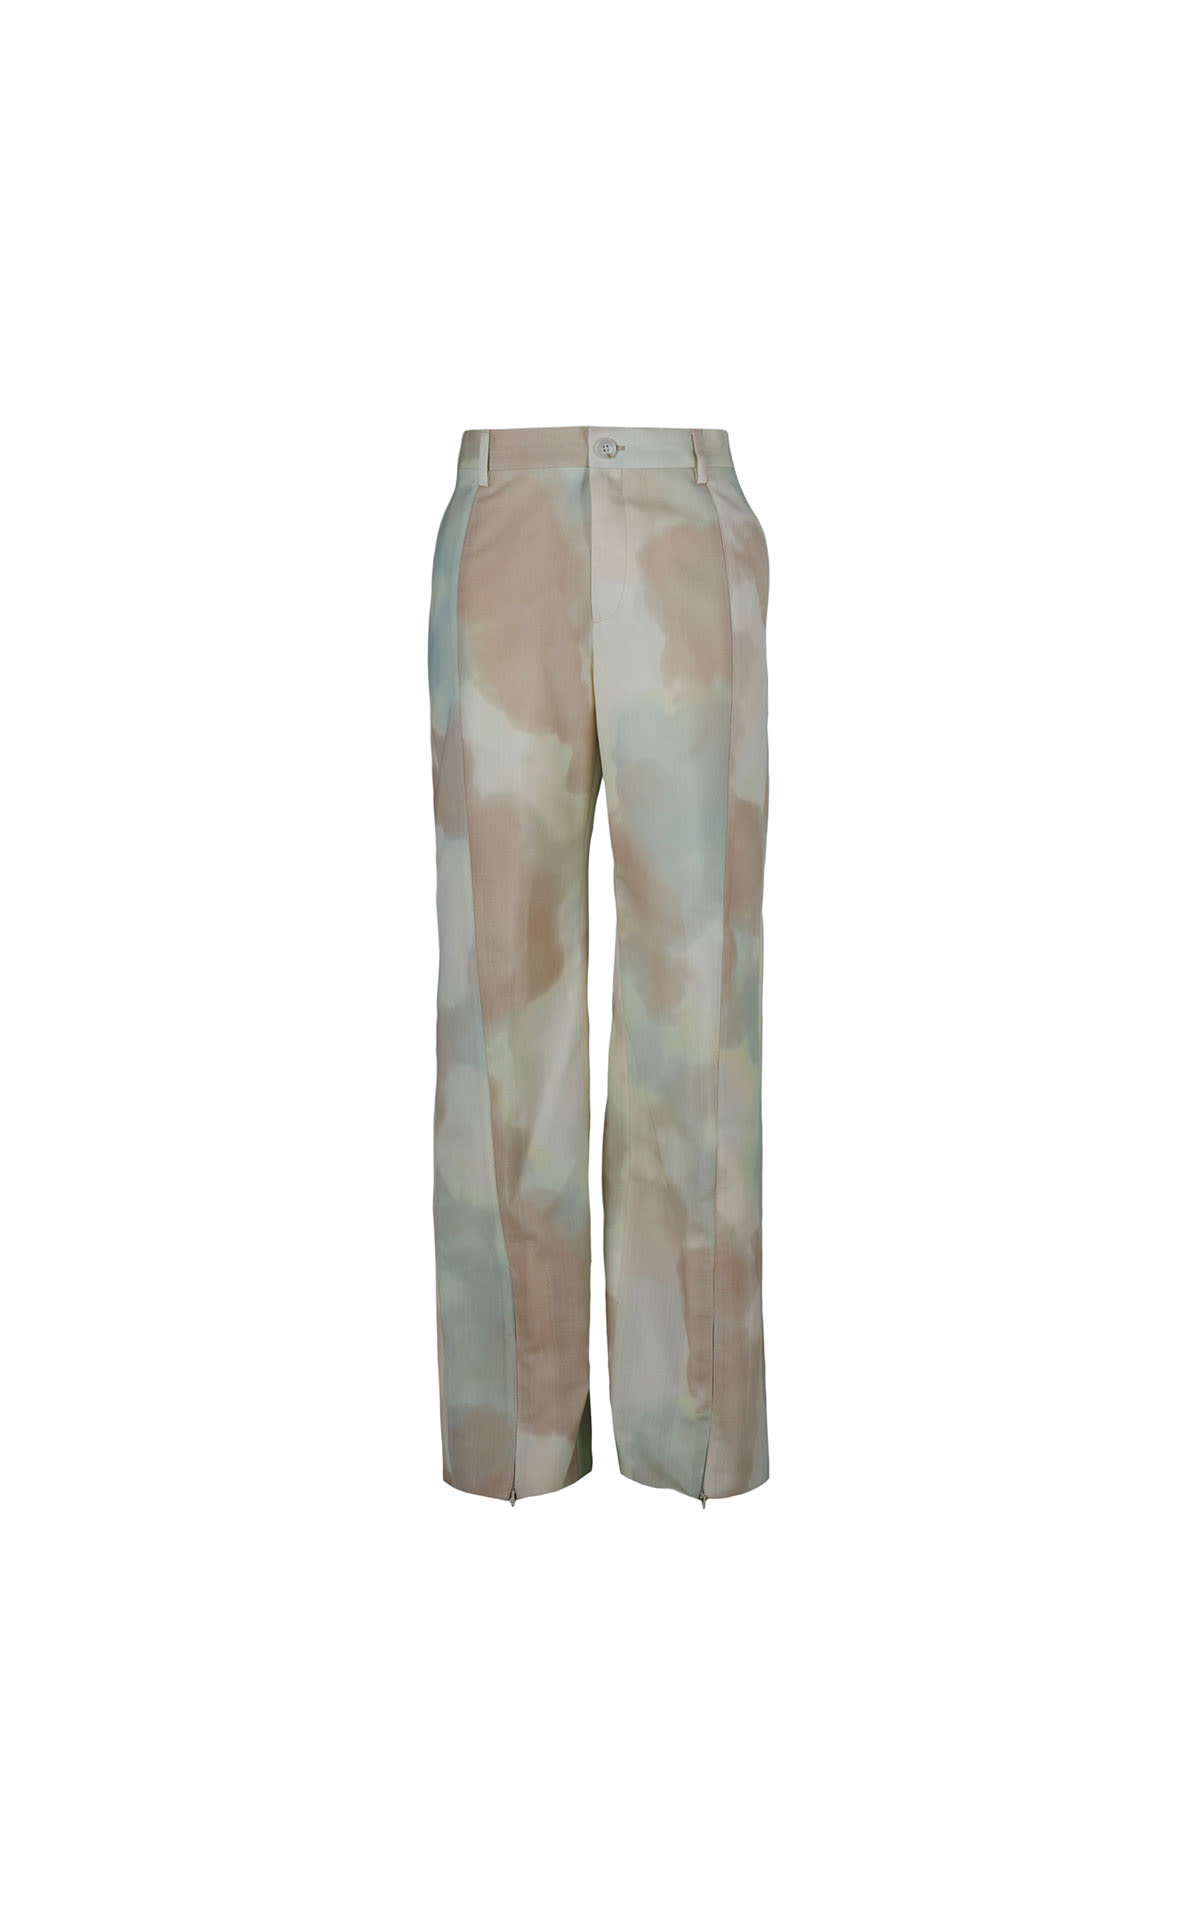 Vivienne Westwood Tuxedo trousers from Bicester Village